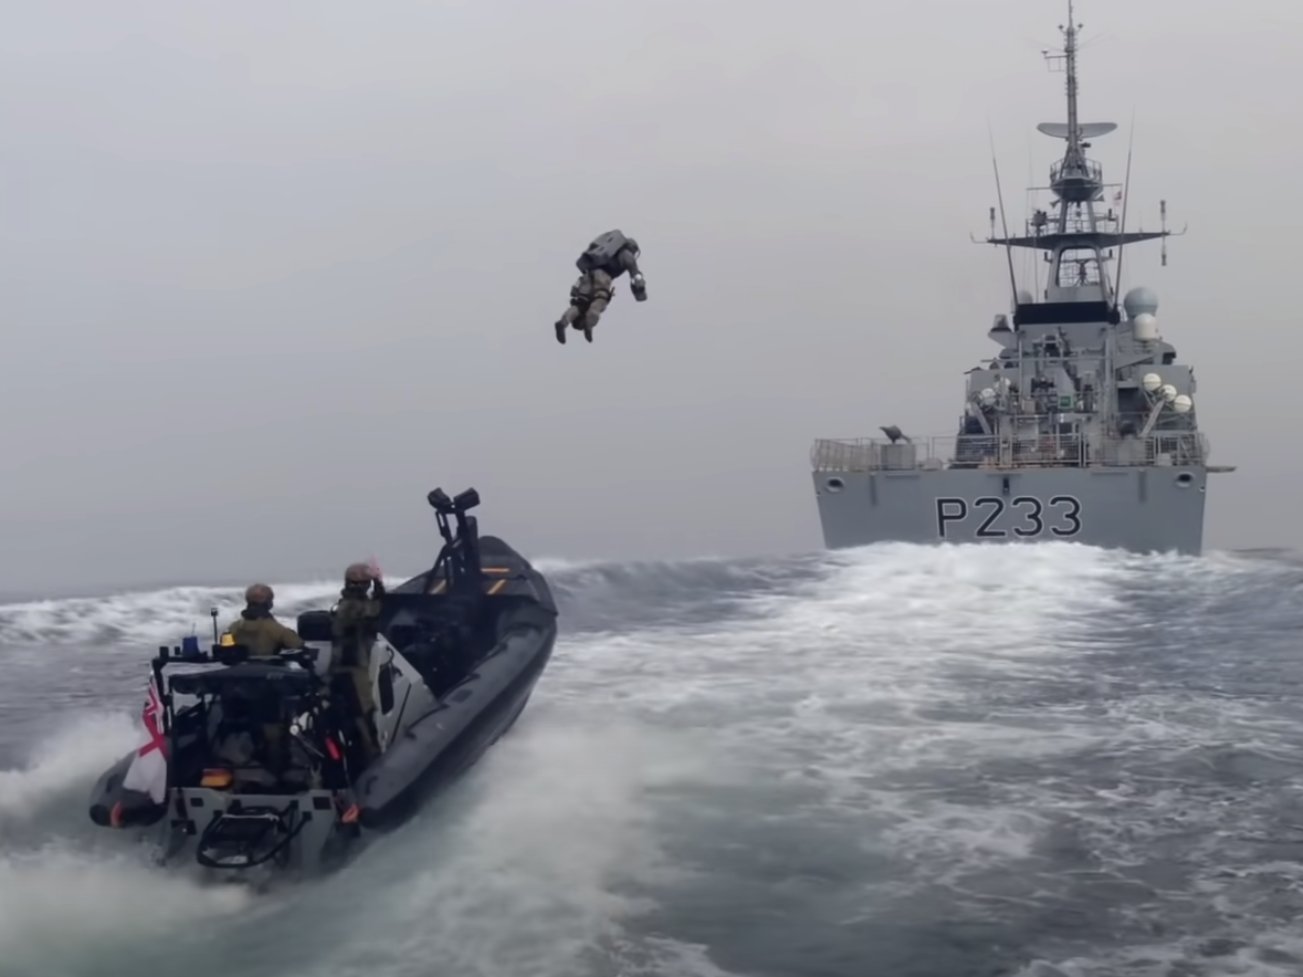 A Royal Marine in a jetpack launches from a fast boat to board a Royal Navy ship.